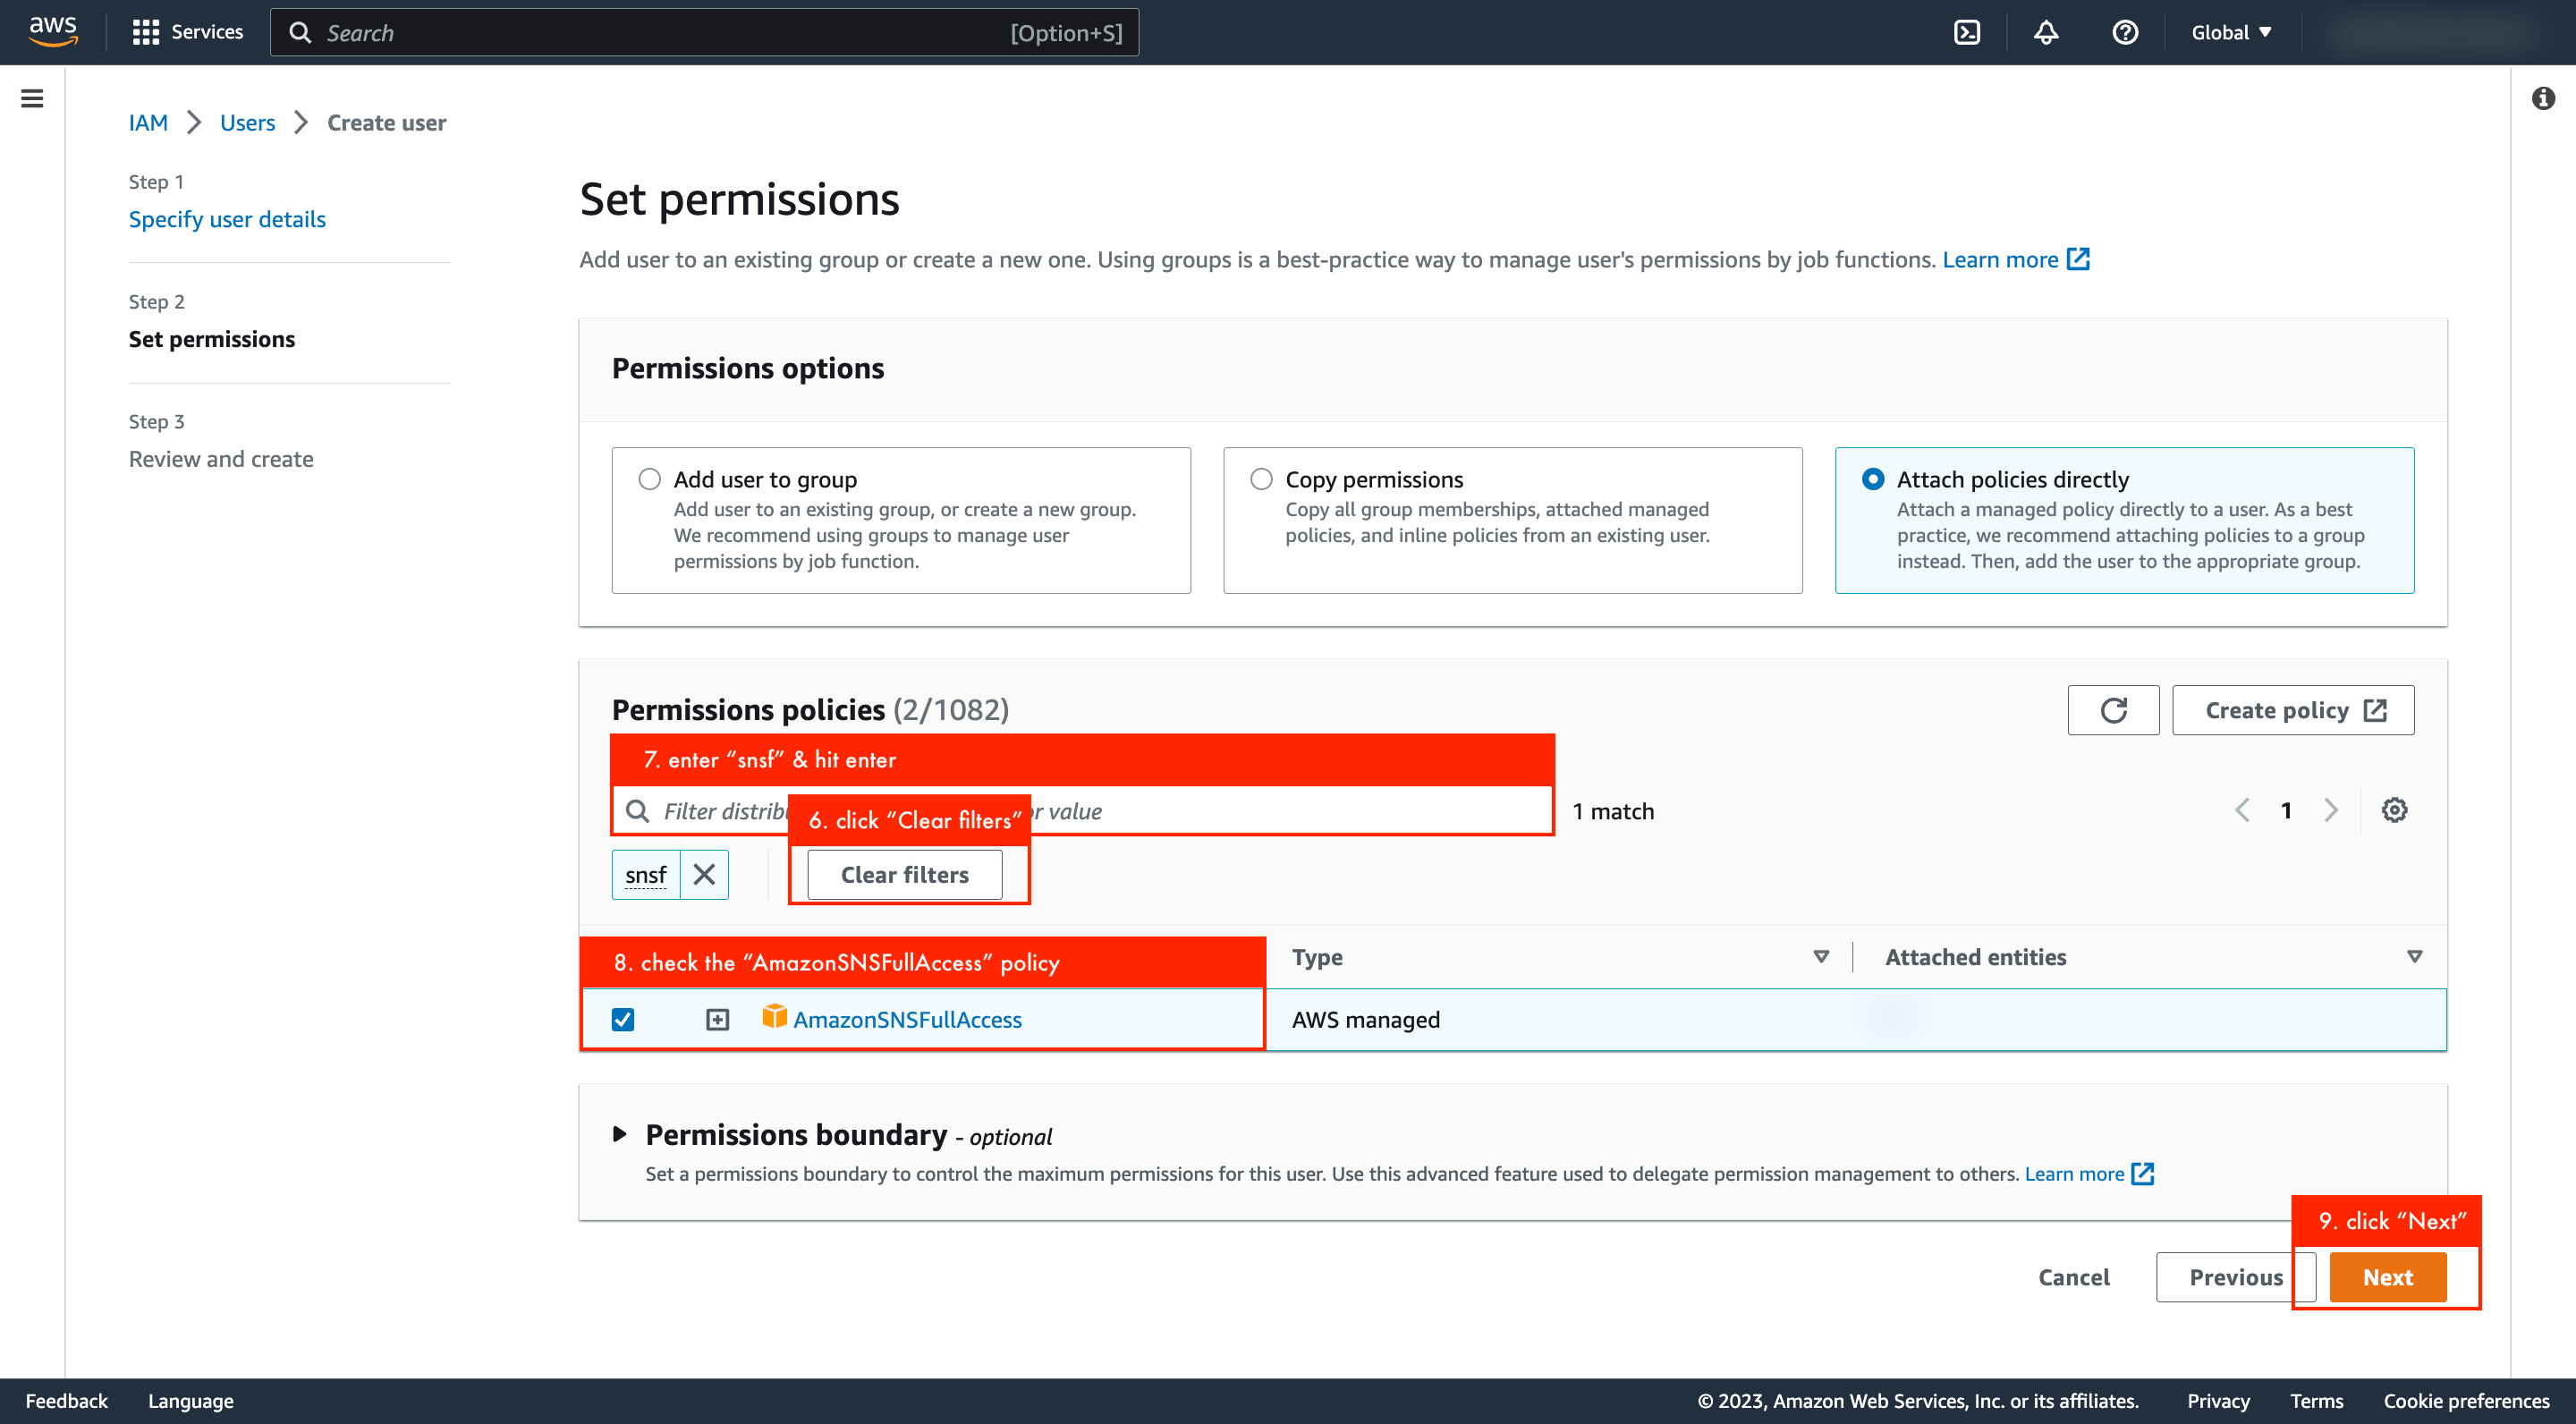 Setting permissions for AmazonSNSFullAccess